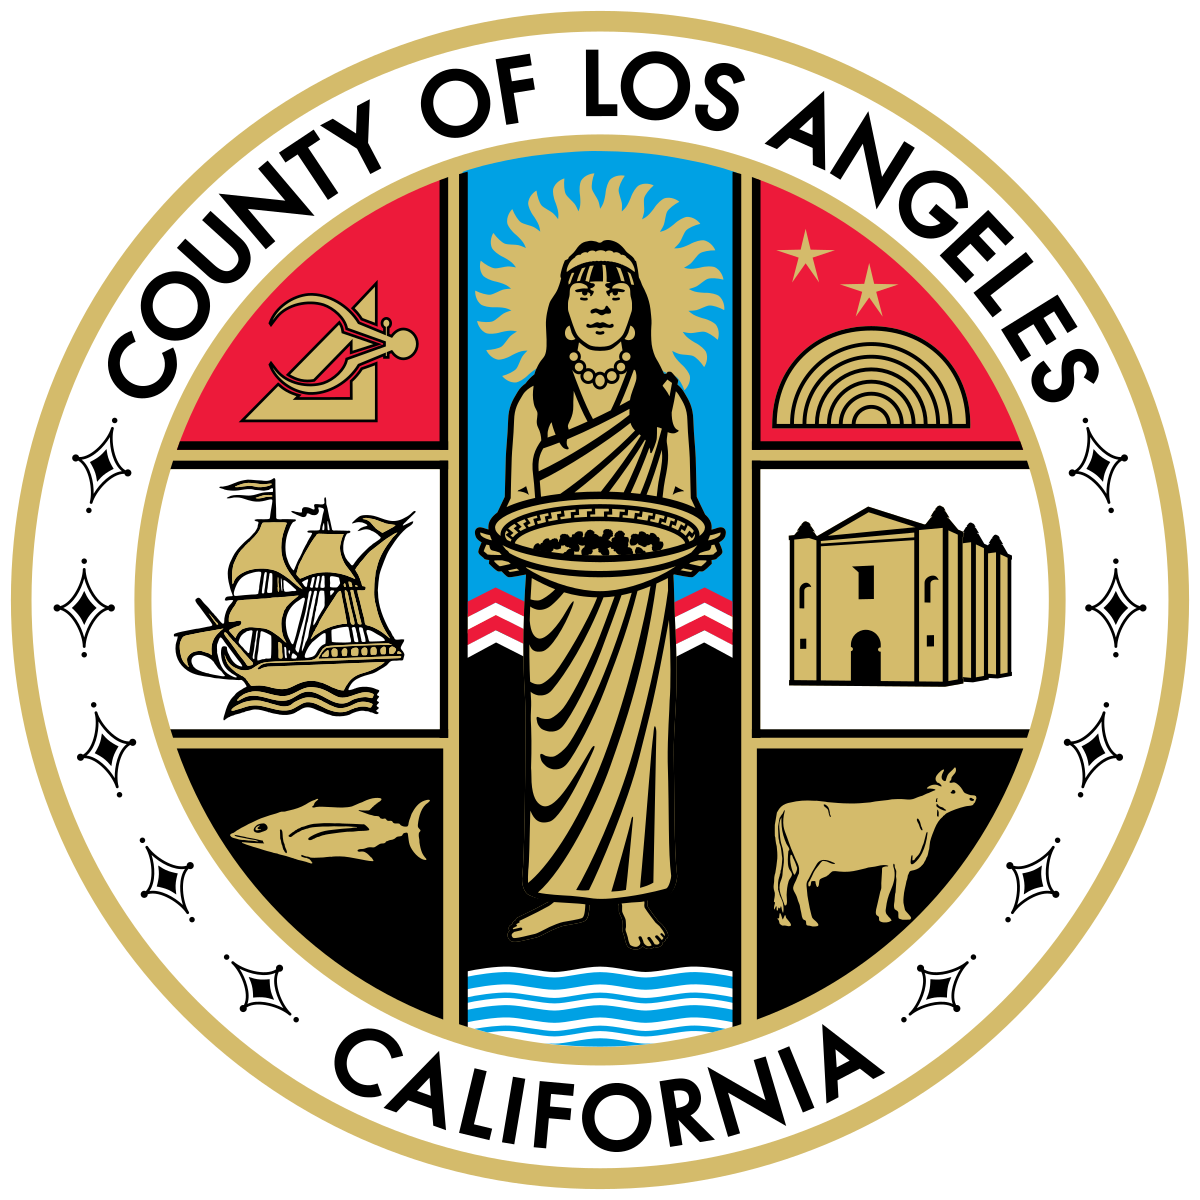 Seal_of_Los_Angeles_County,_California.svg.png